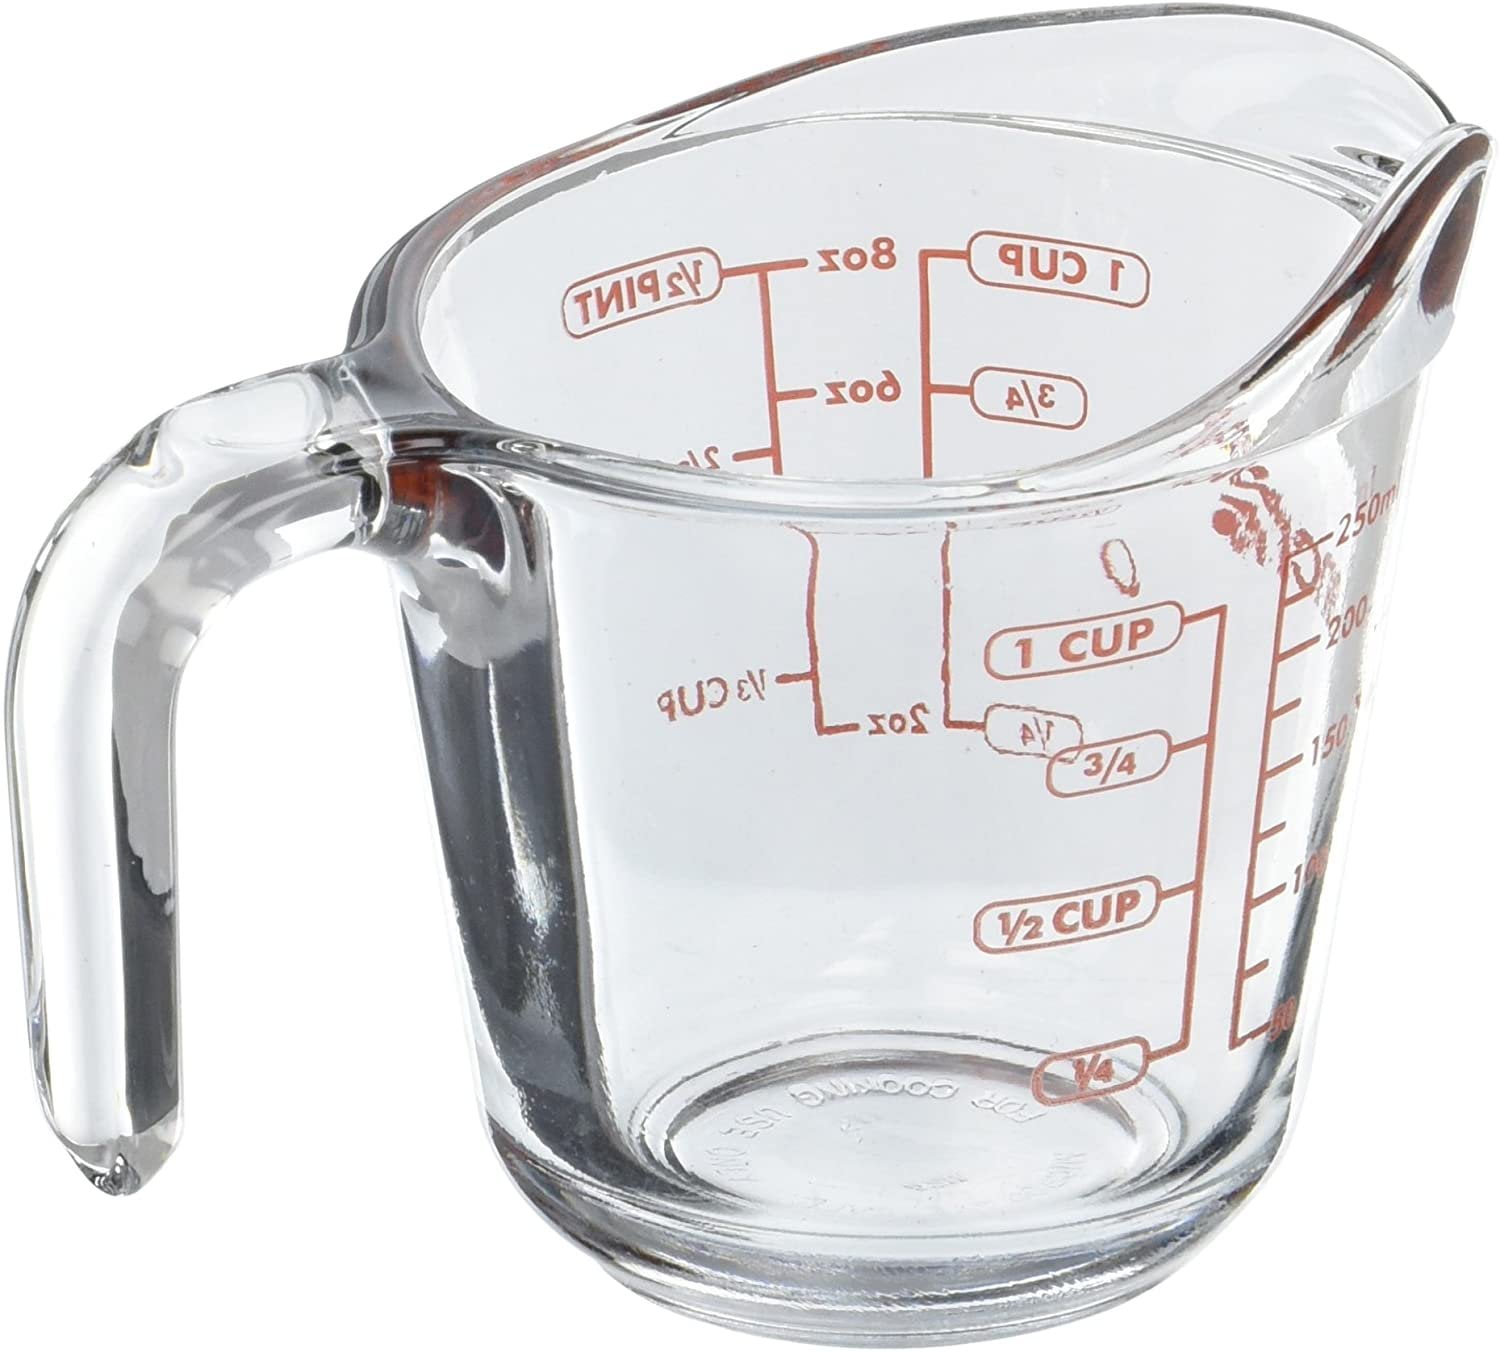  Anchor Hocking 55177OL13 16 Oz Measuring Cup, Clear